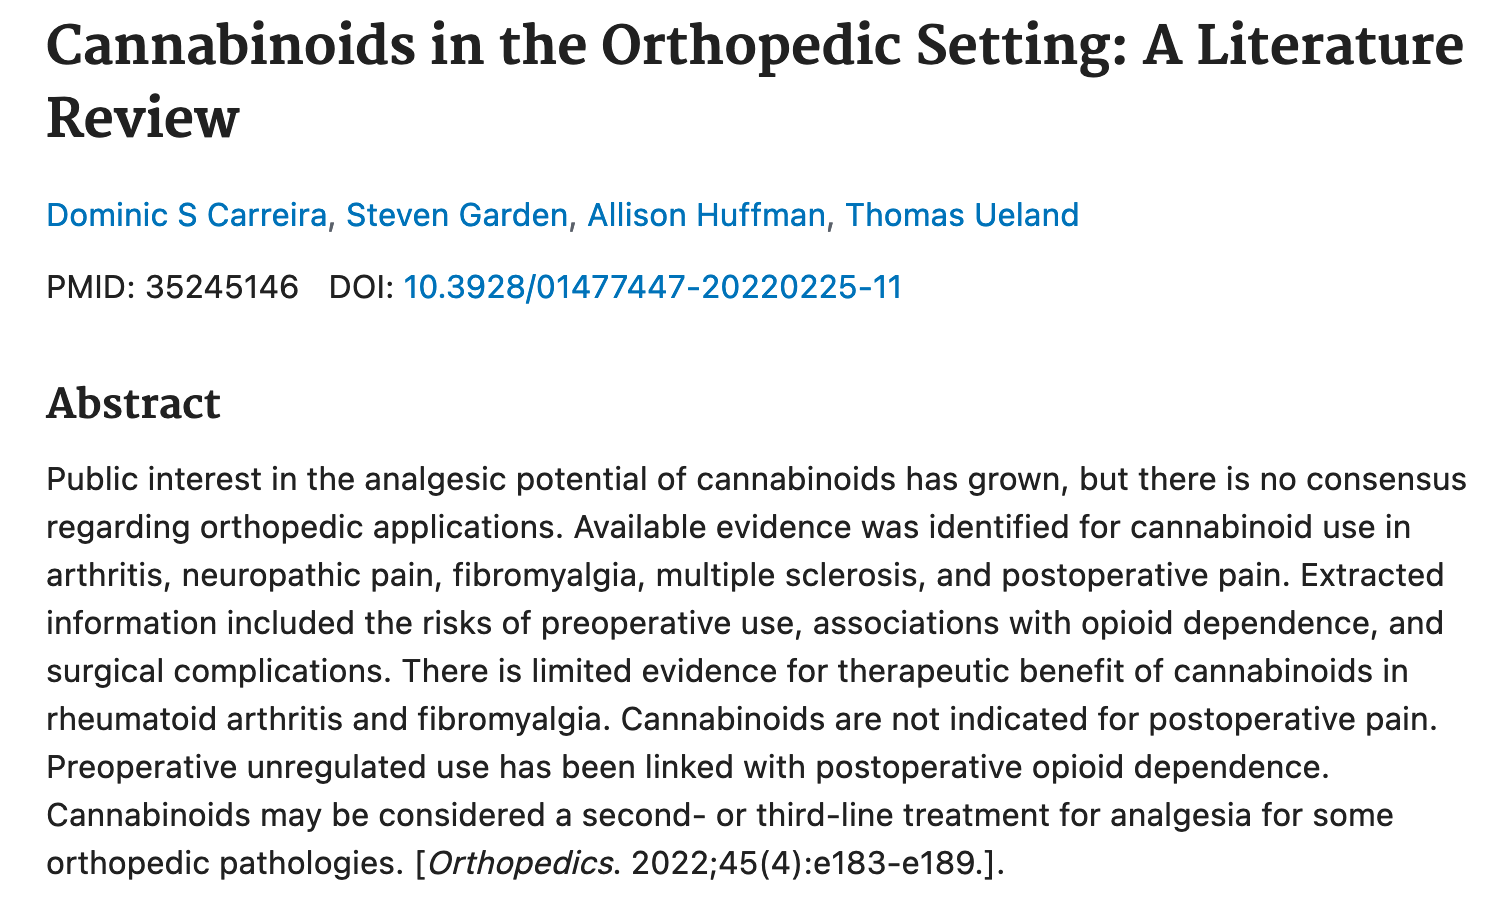 Cannabinoids in the Orthopedic Setting: A Literature Review